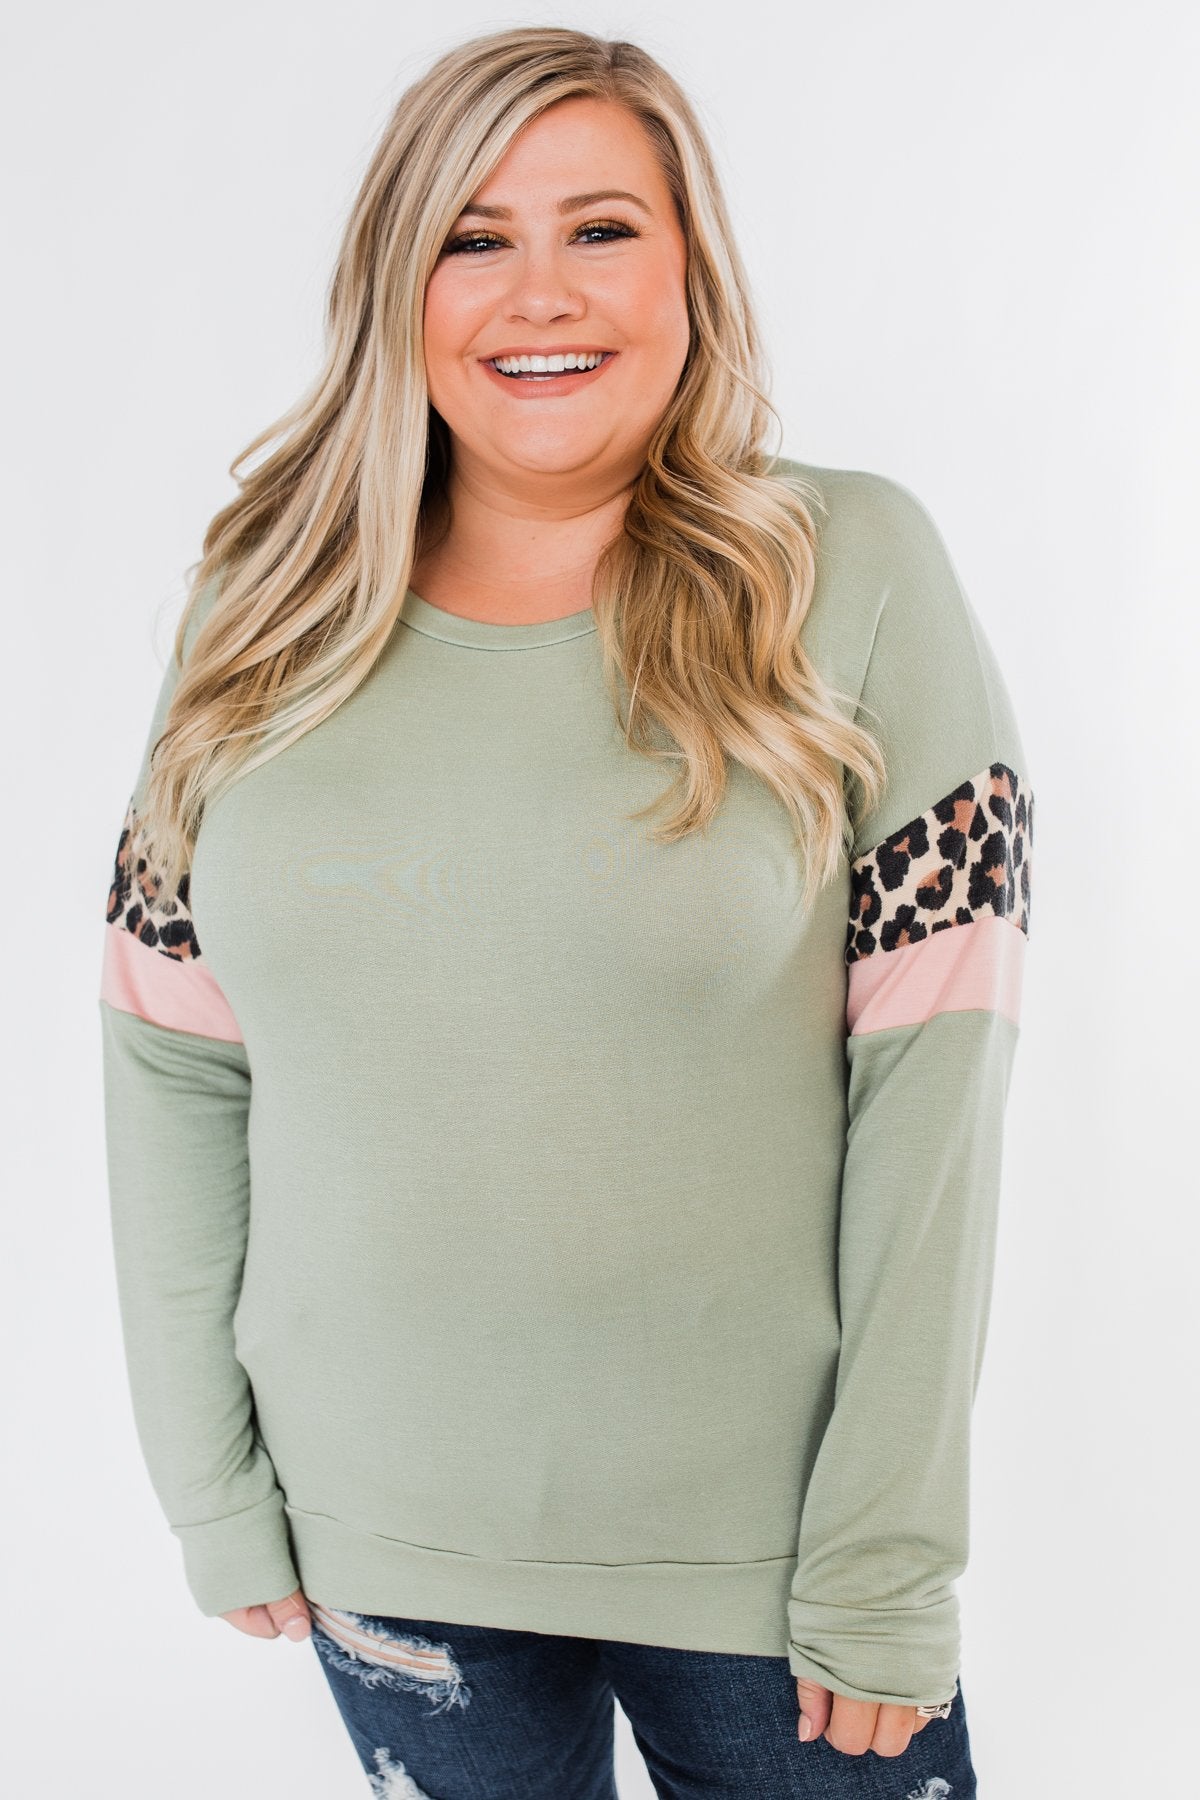 Can't Be Tamed Long Sleeve Top- Sage, Leopard, & Blush